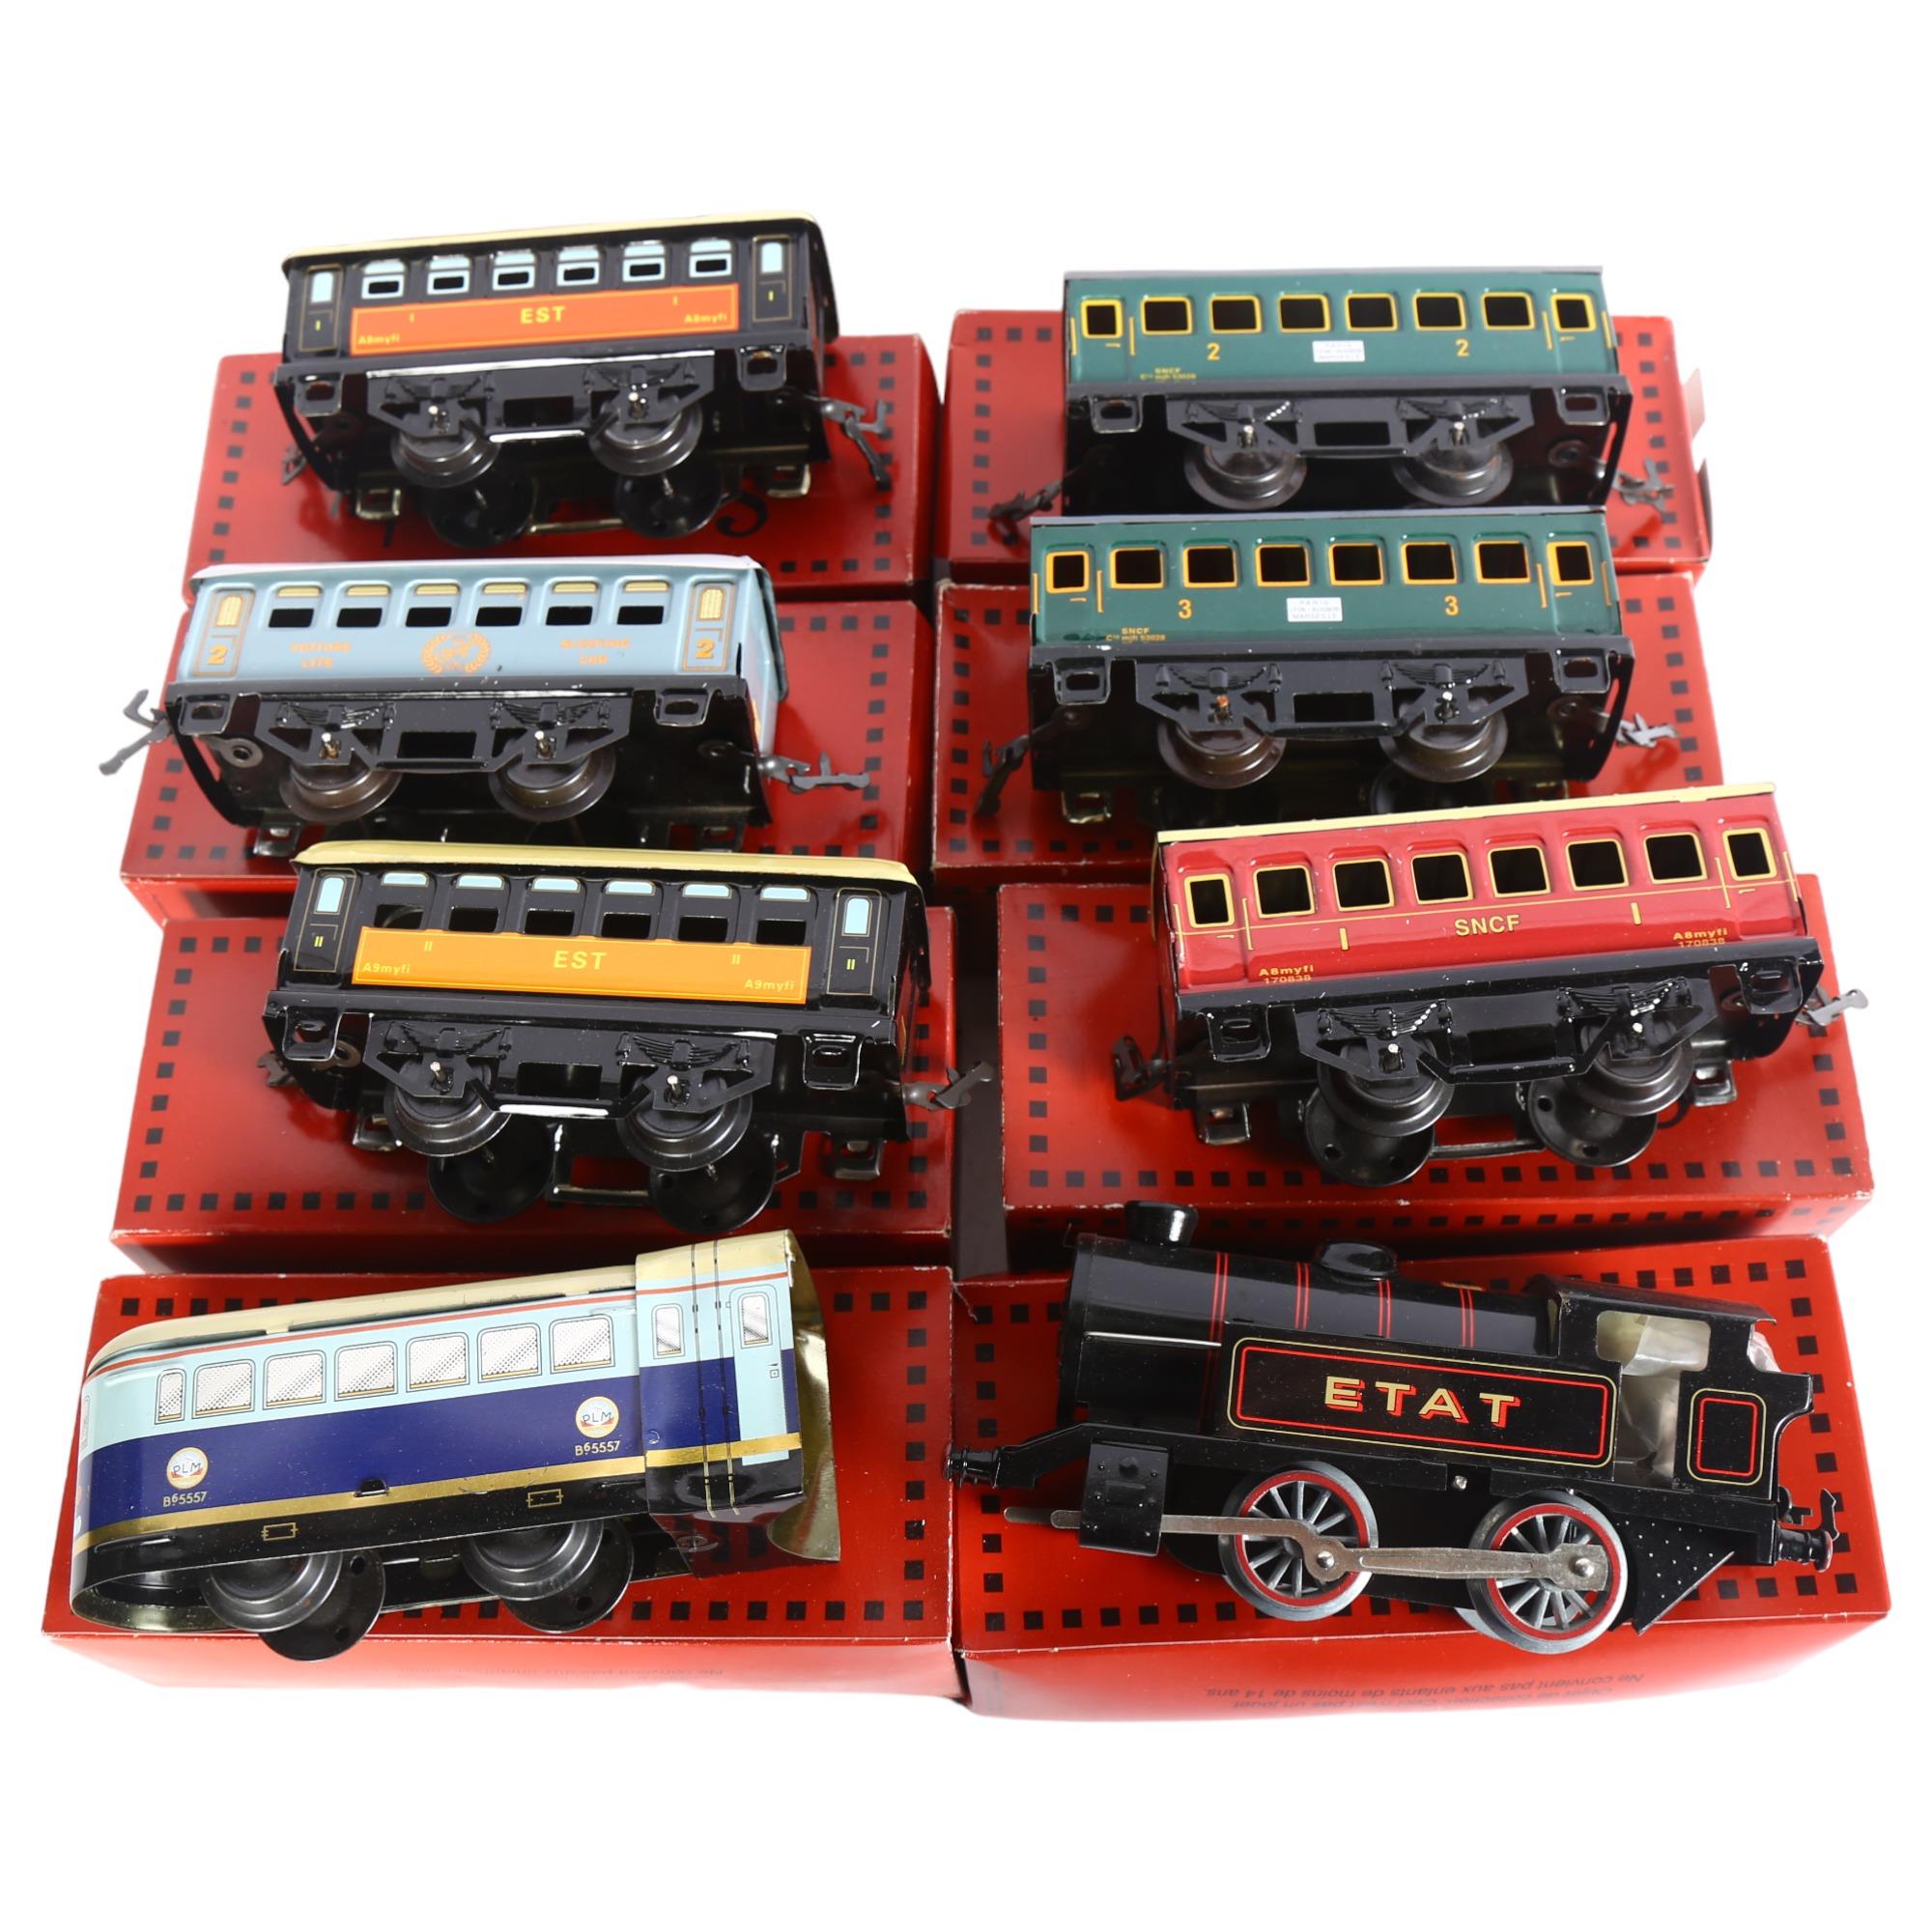 A quantity of French Hornby Series Hachette, OO gauge boxed items, including a locomotive and